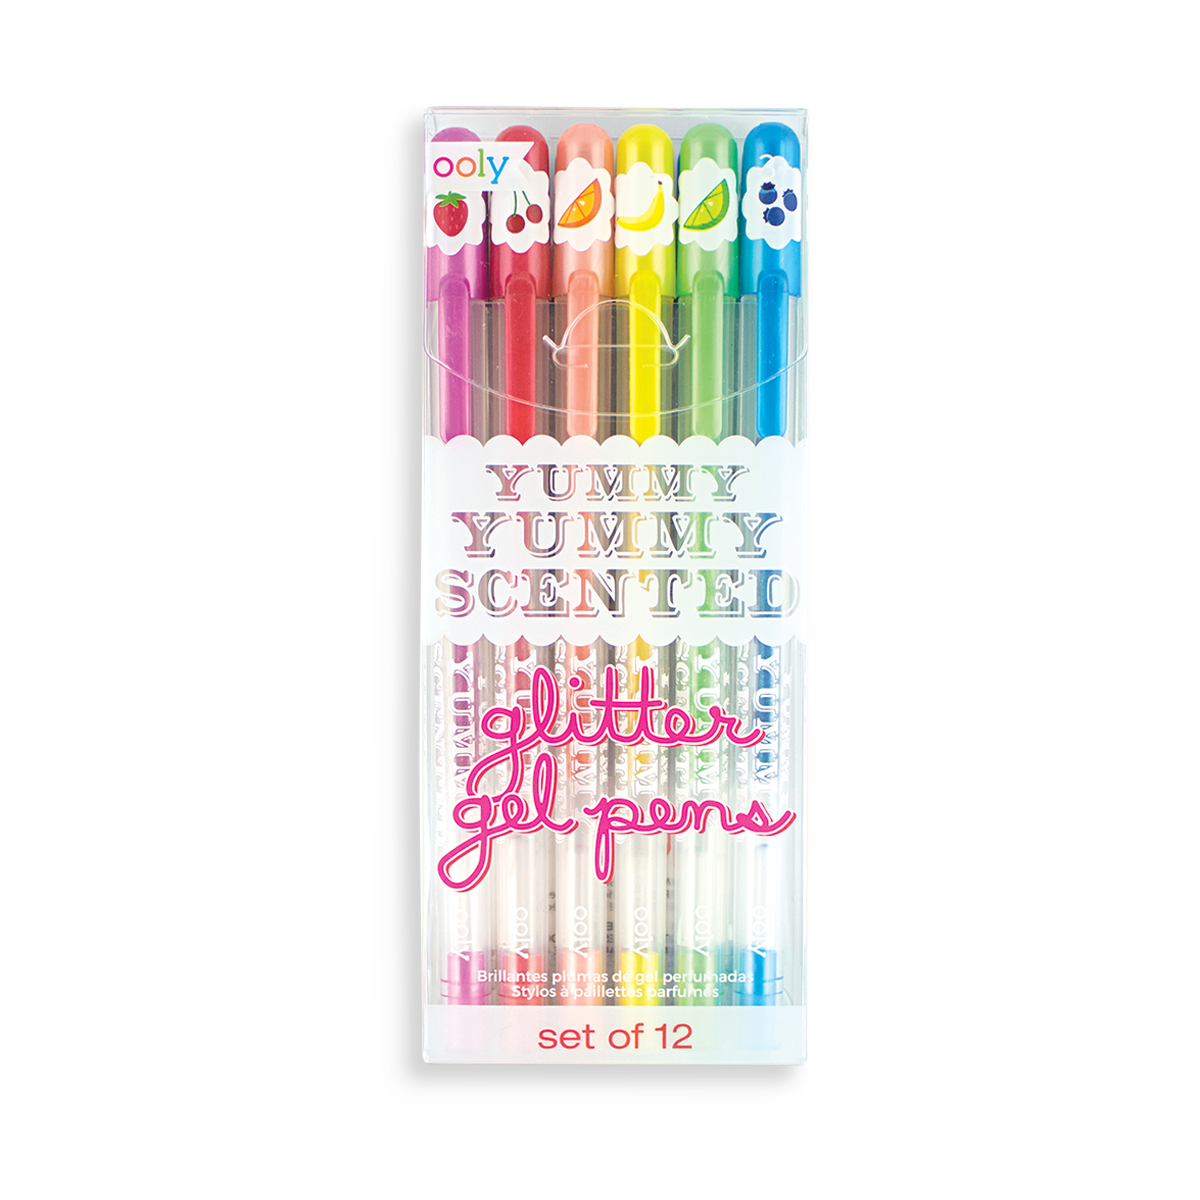 Ooly Yummy Yummy Scented Twist-Up Crayon Set of 10 – Crush